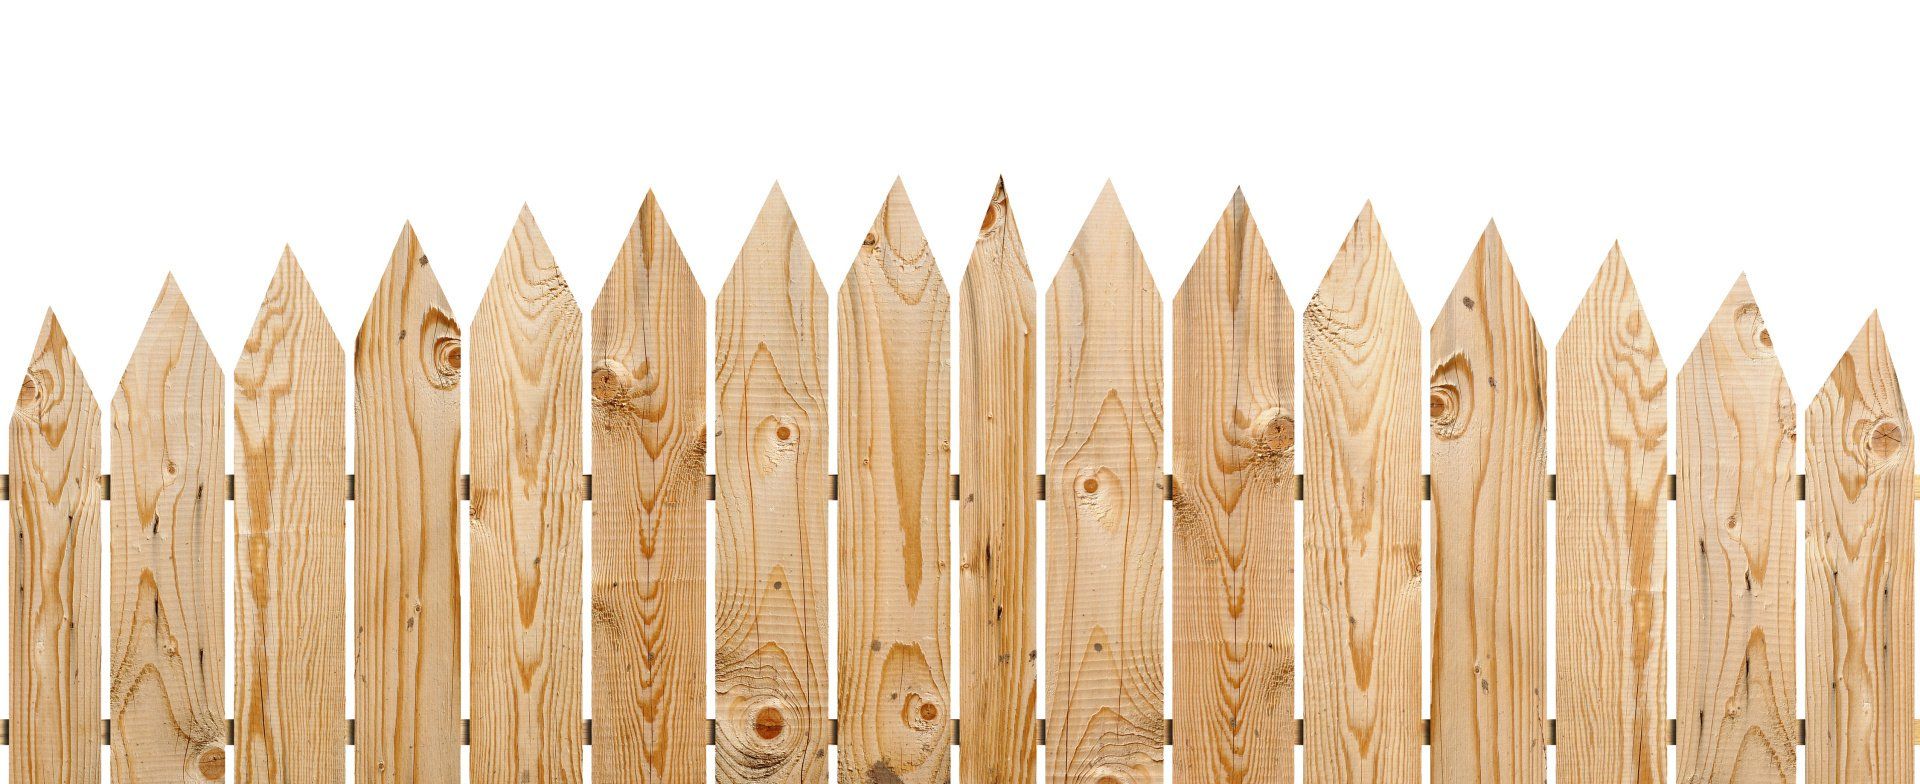 Wood fence pickets with pointed tips on a white background